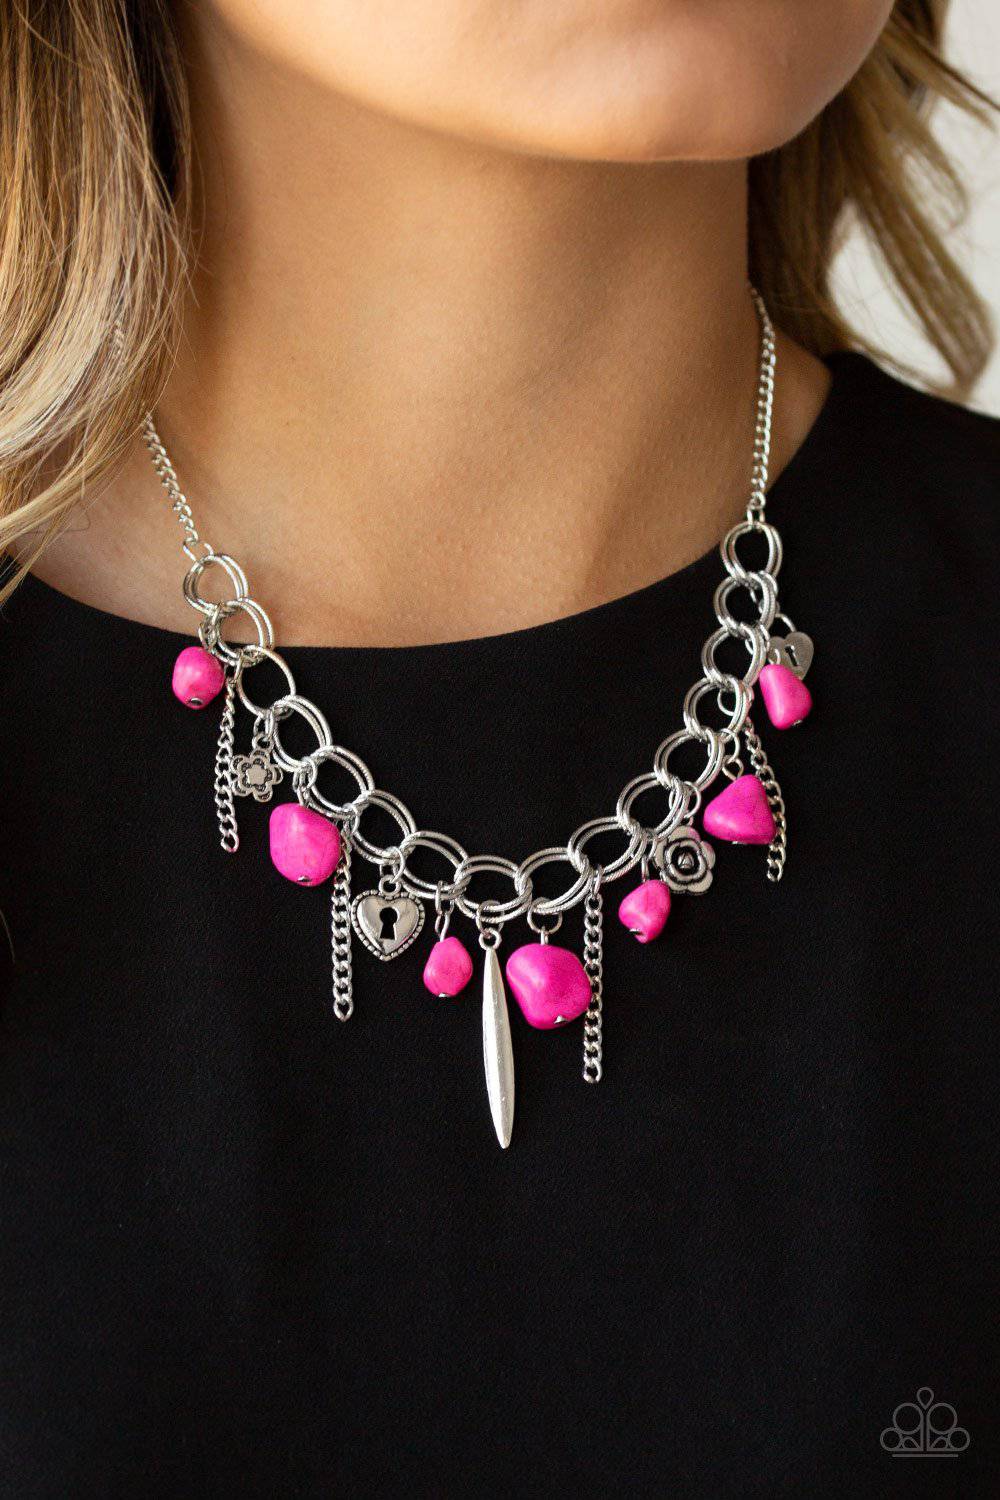 Southern Sweetheart - Pink Floral and Heart Charm Necklace - Paparazzi - GlaMarous Titi Jewels